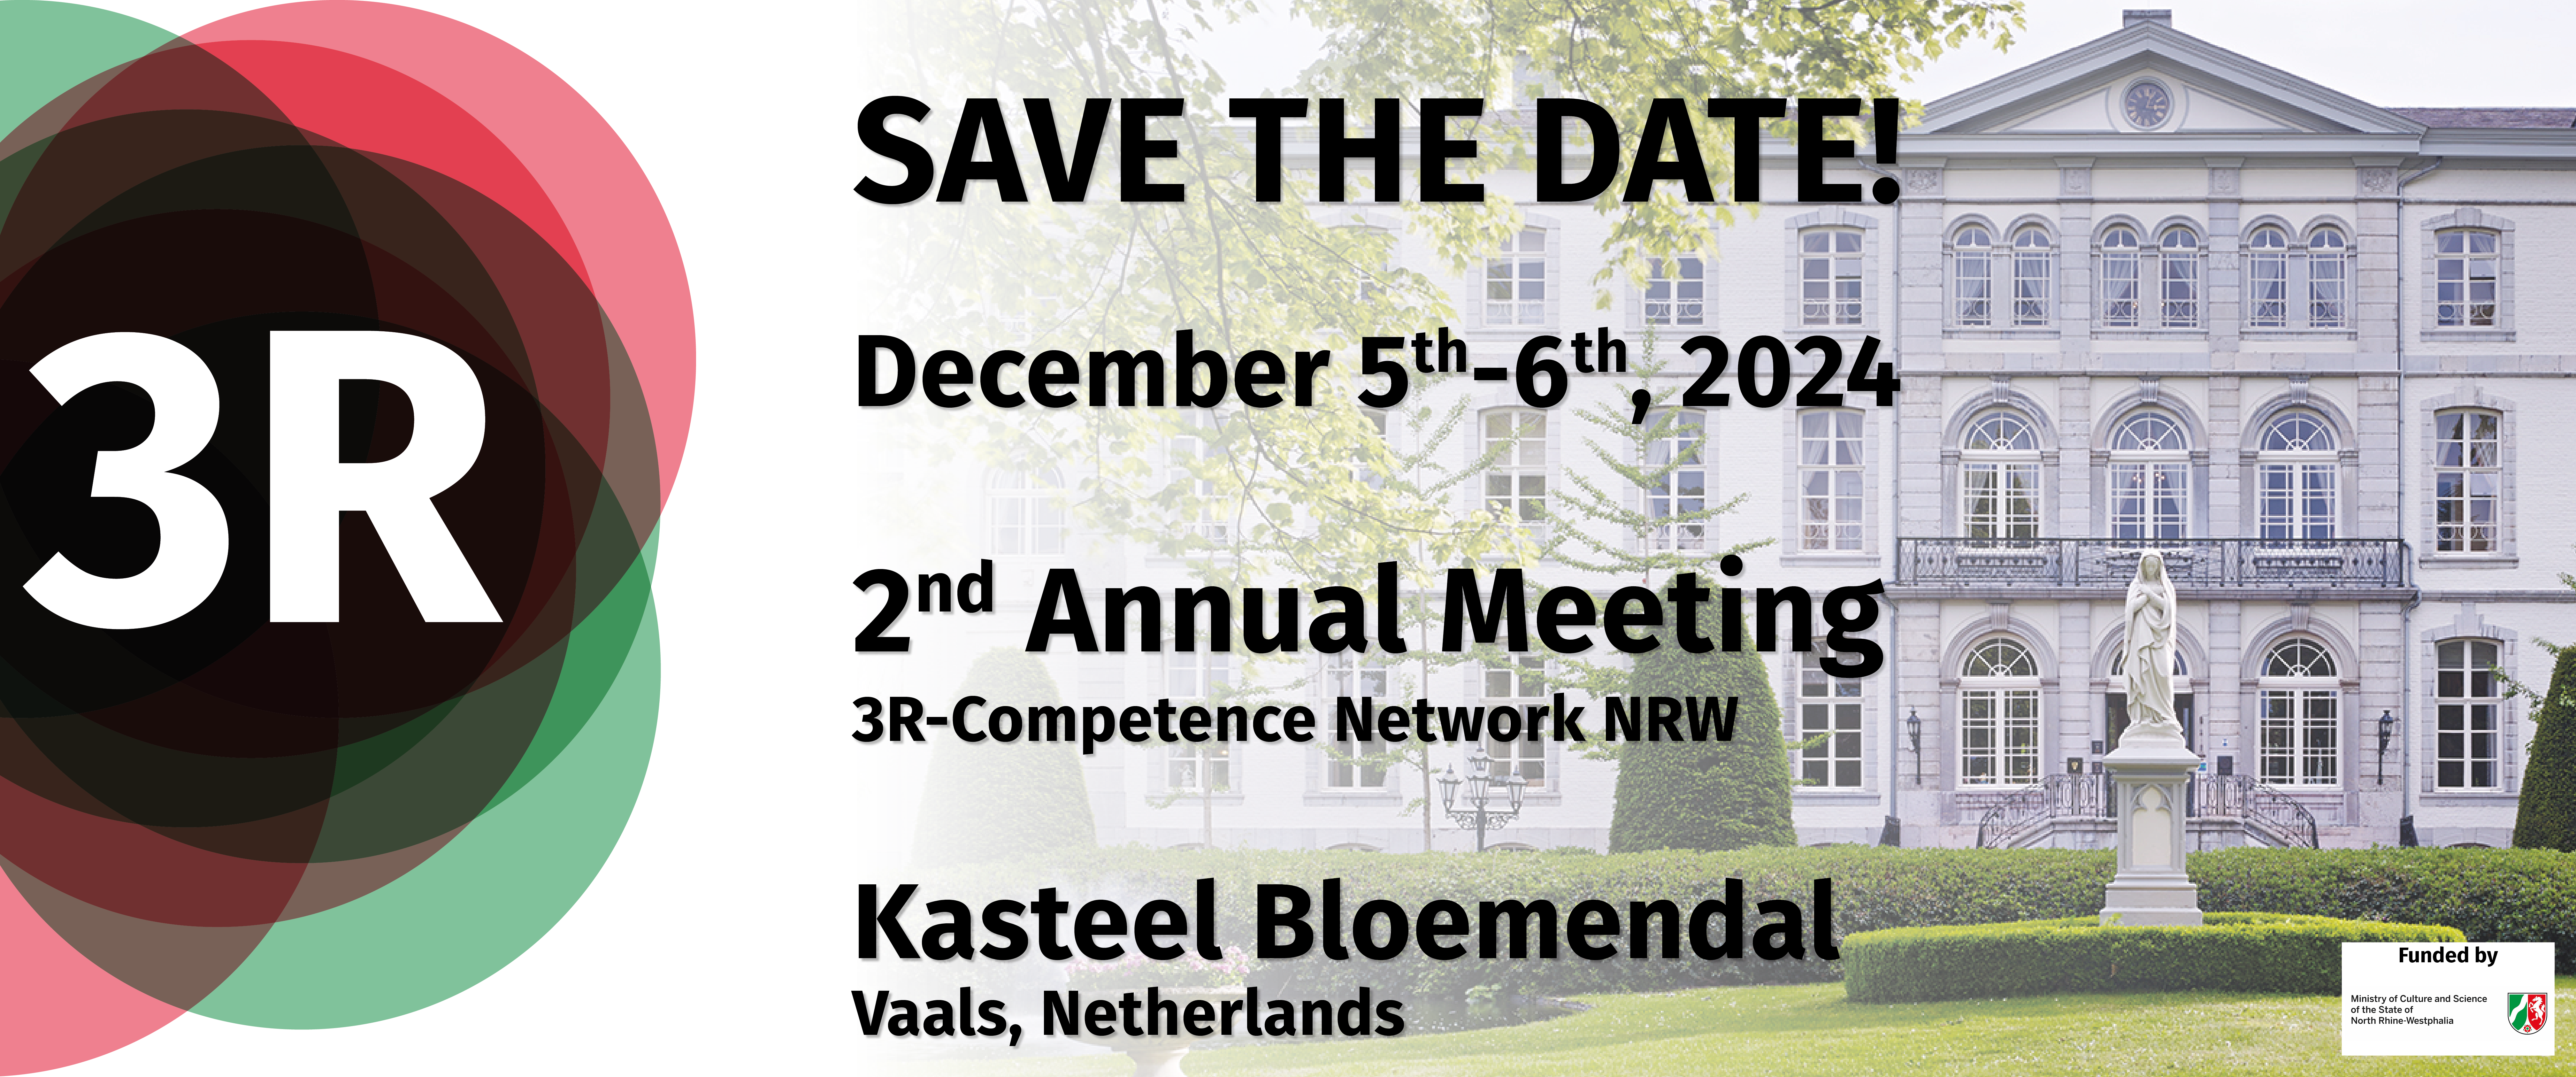 Save-the-Date banner for the 2nd Annual Meeting of the 3R-Competence Network NRW